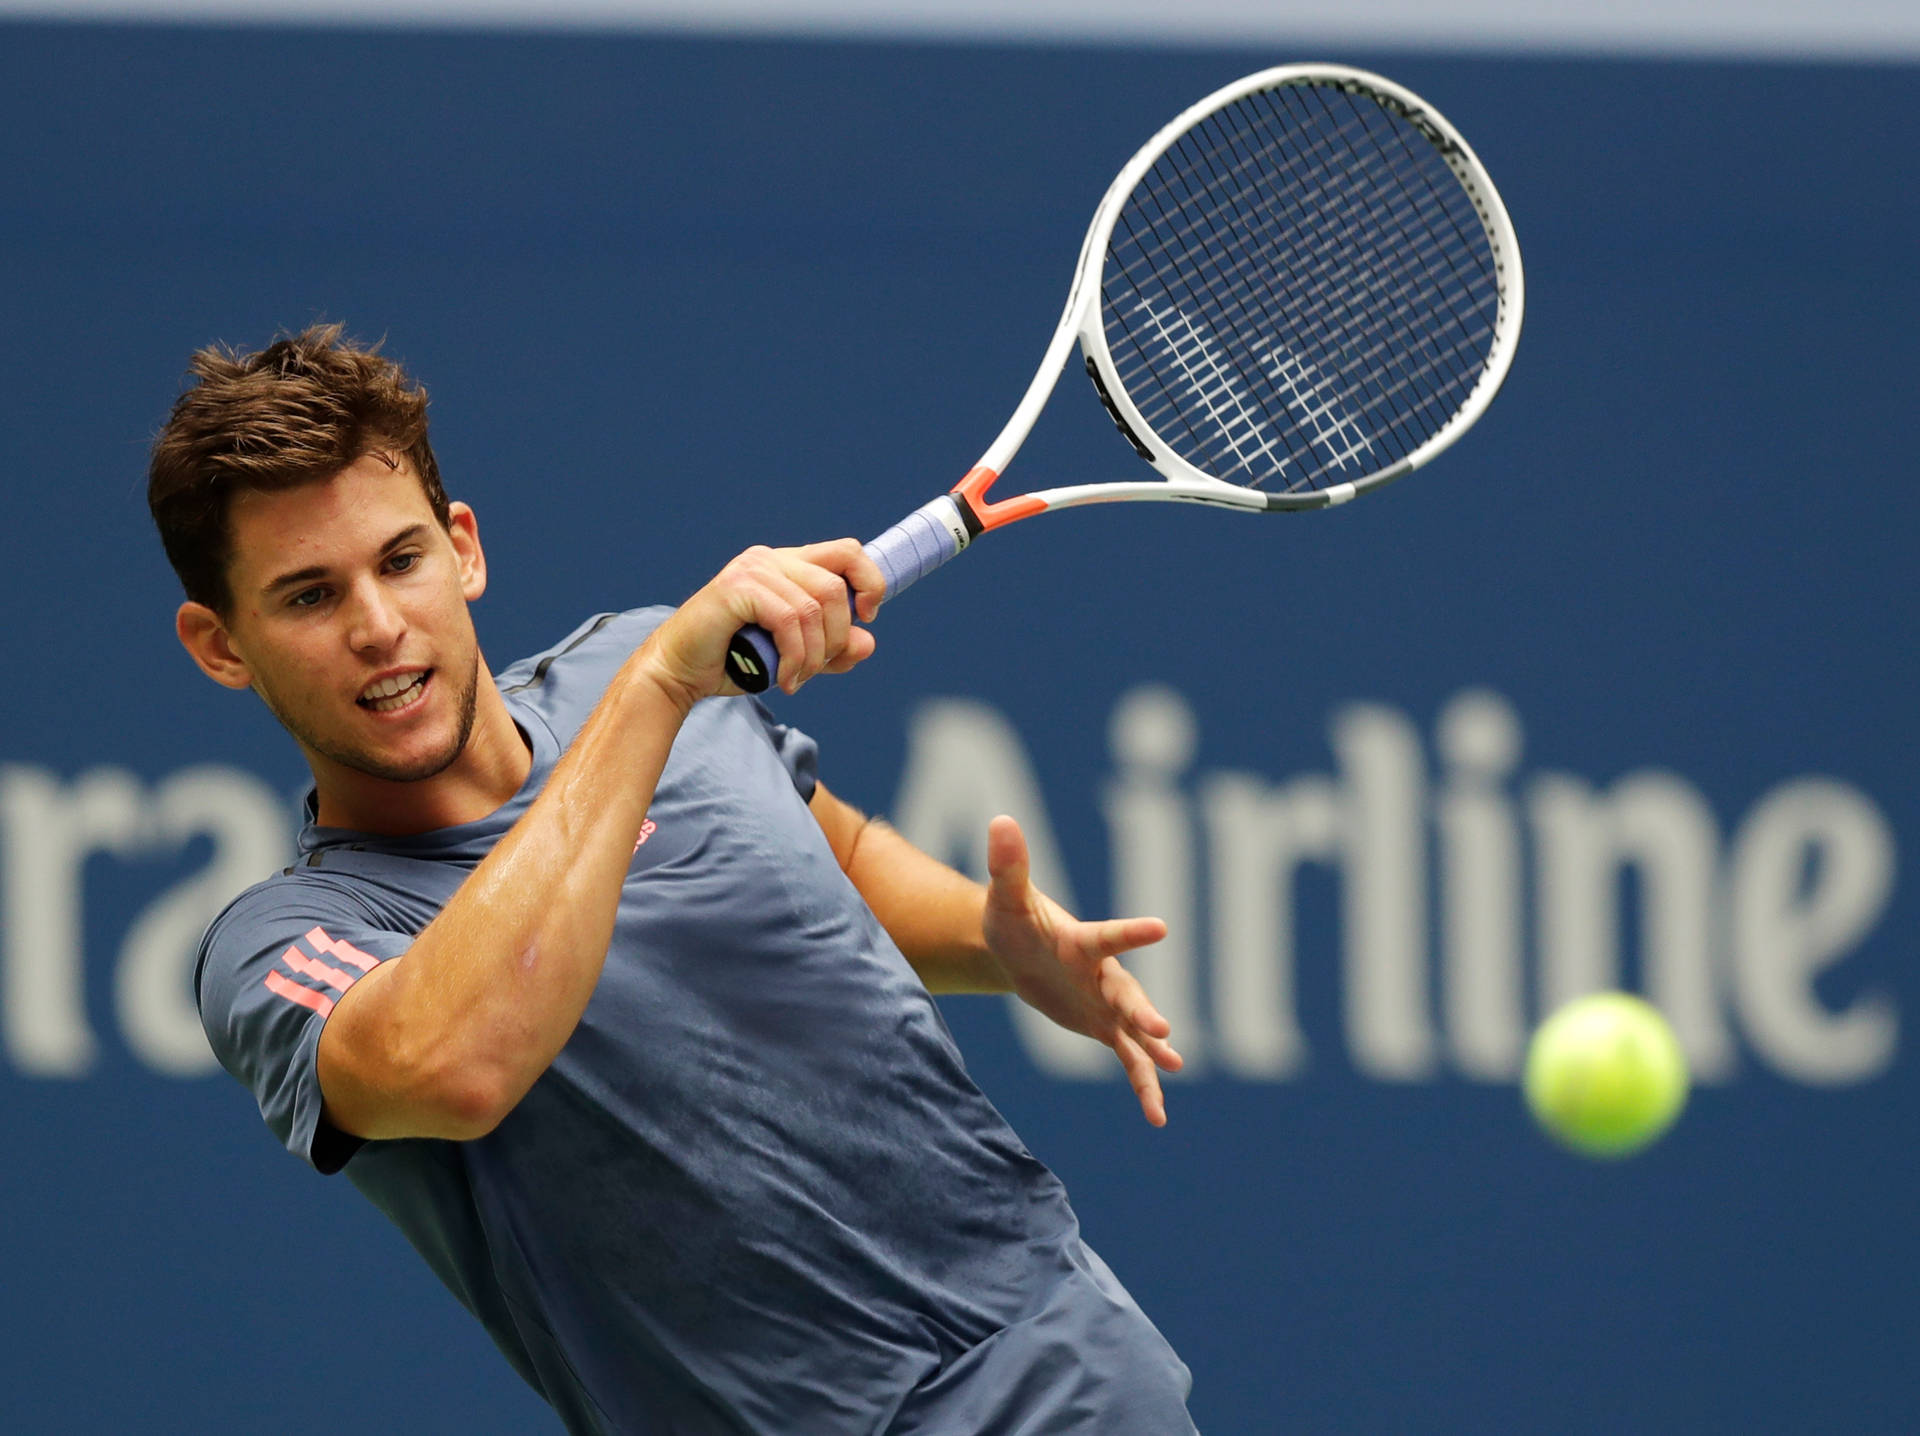 Dominic Thiem In Action On The Tennis Court Background